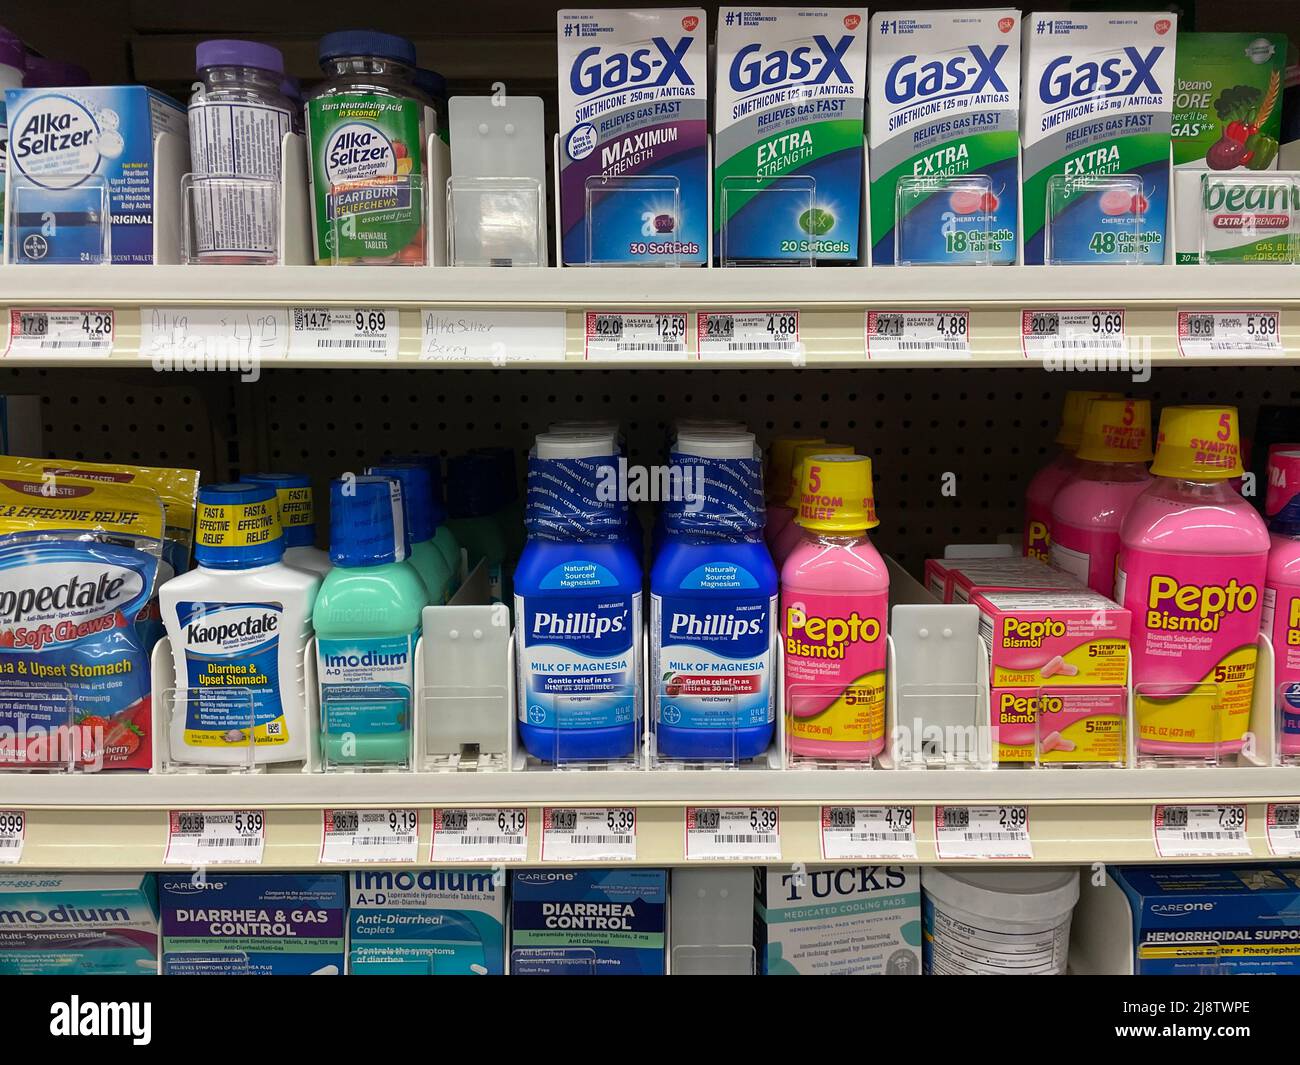 Grovetown, Ga USA - 04 15 22: Retail store medicine section laxatives and gas section Stock Photo